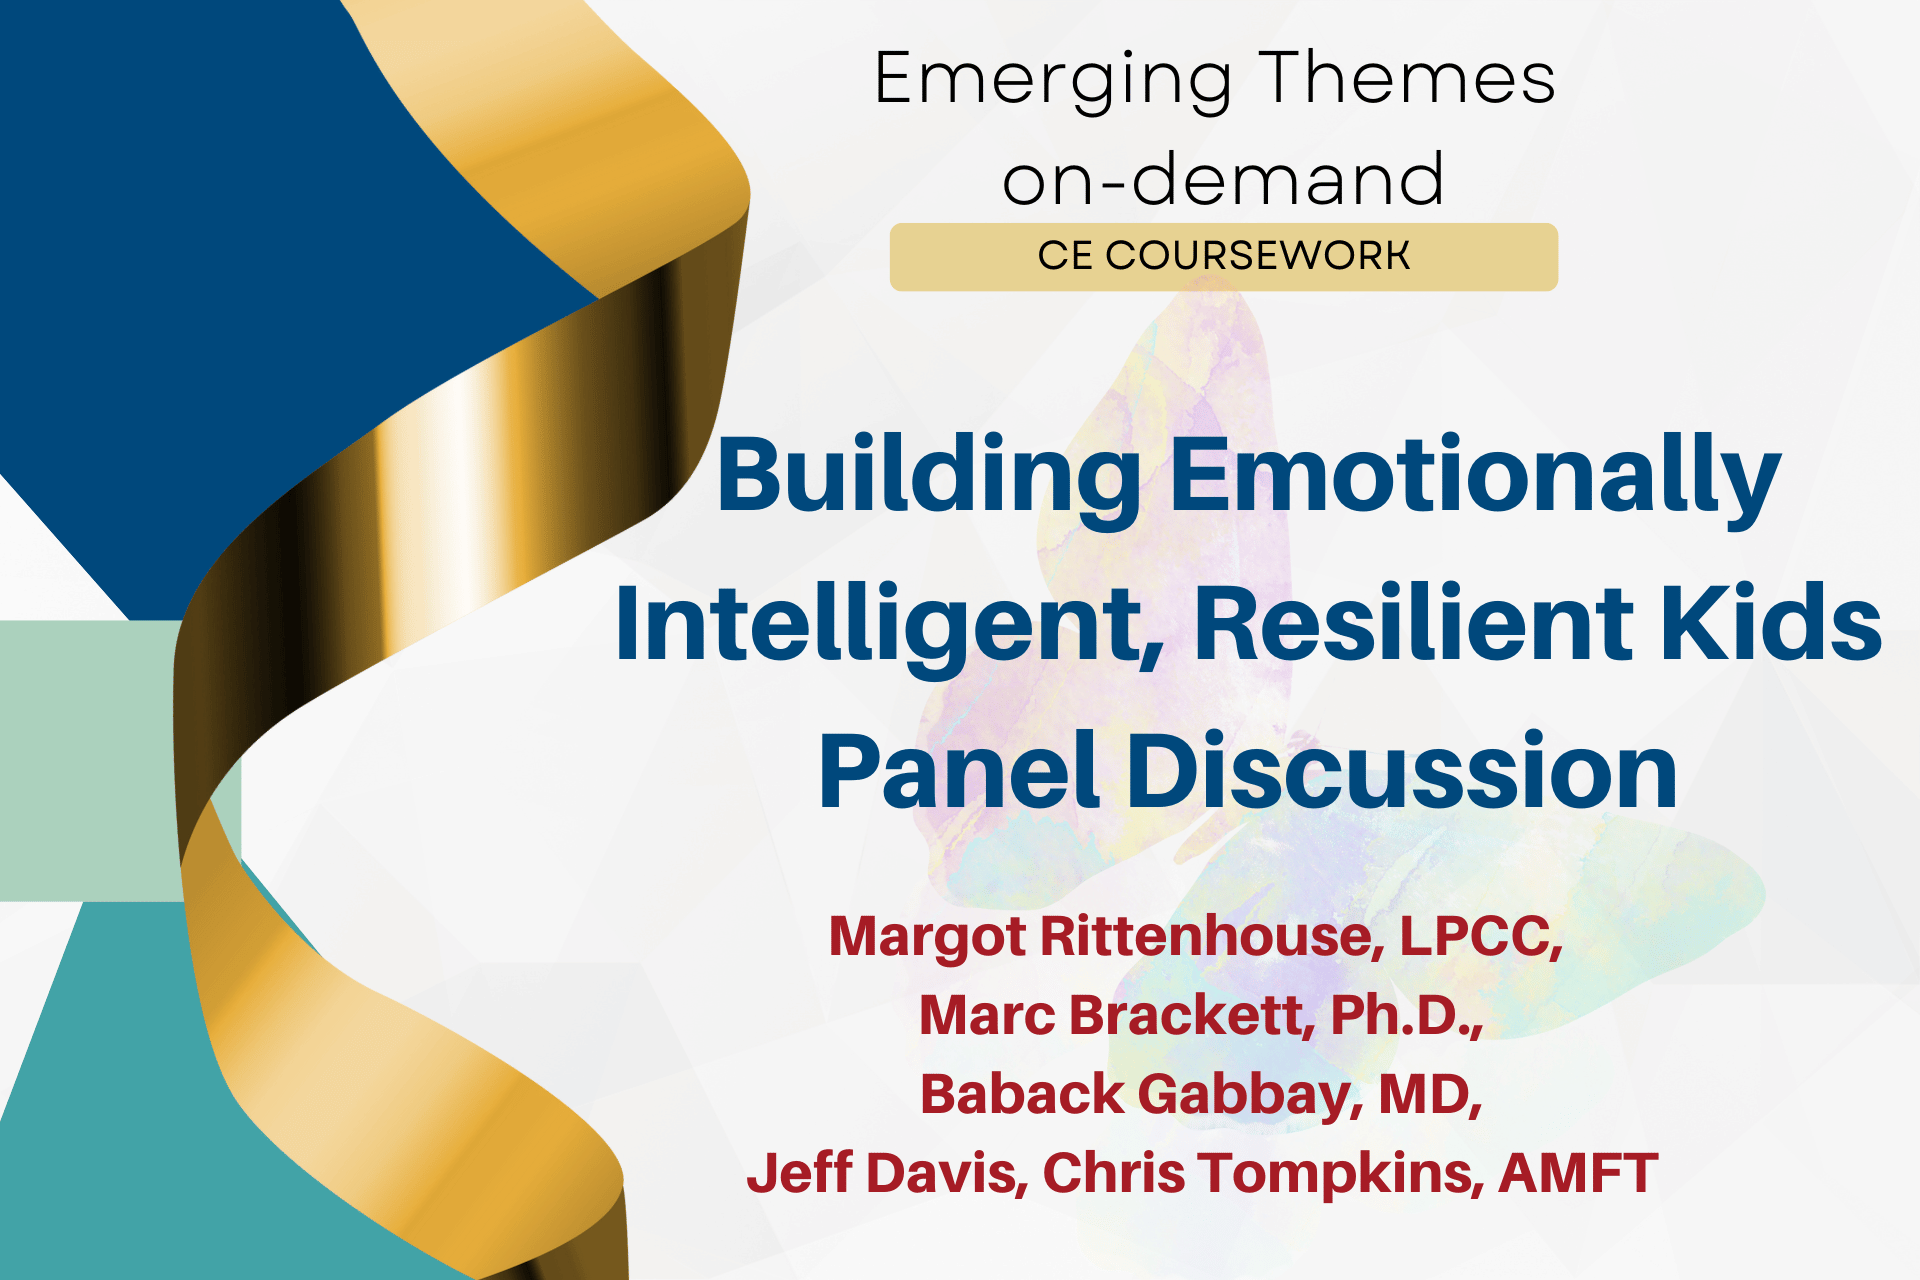 Building Emotionally Intelligent, Resilient Kids Panel Discussion